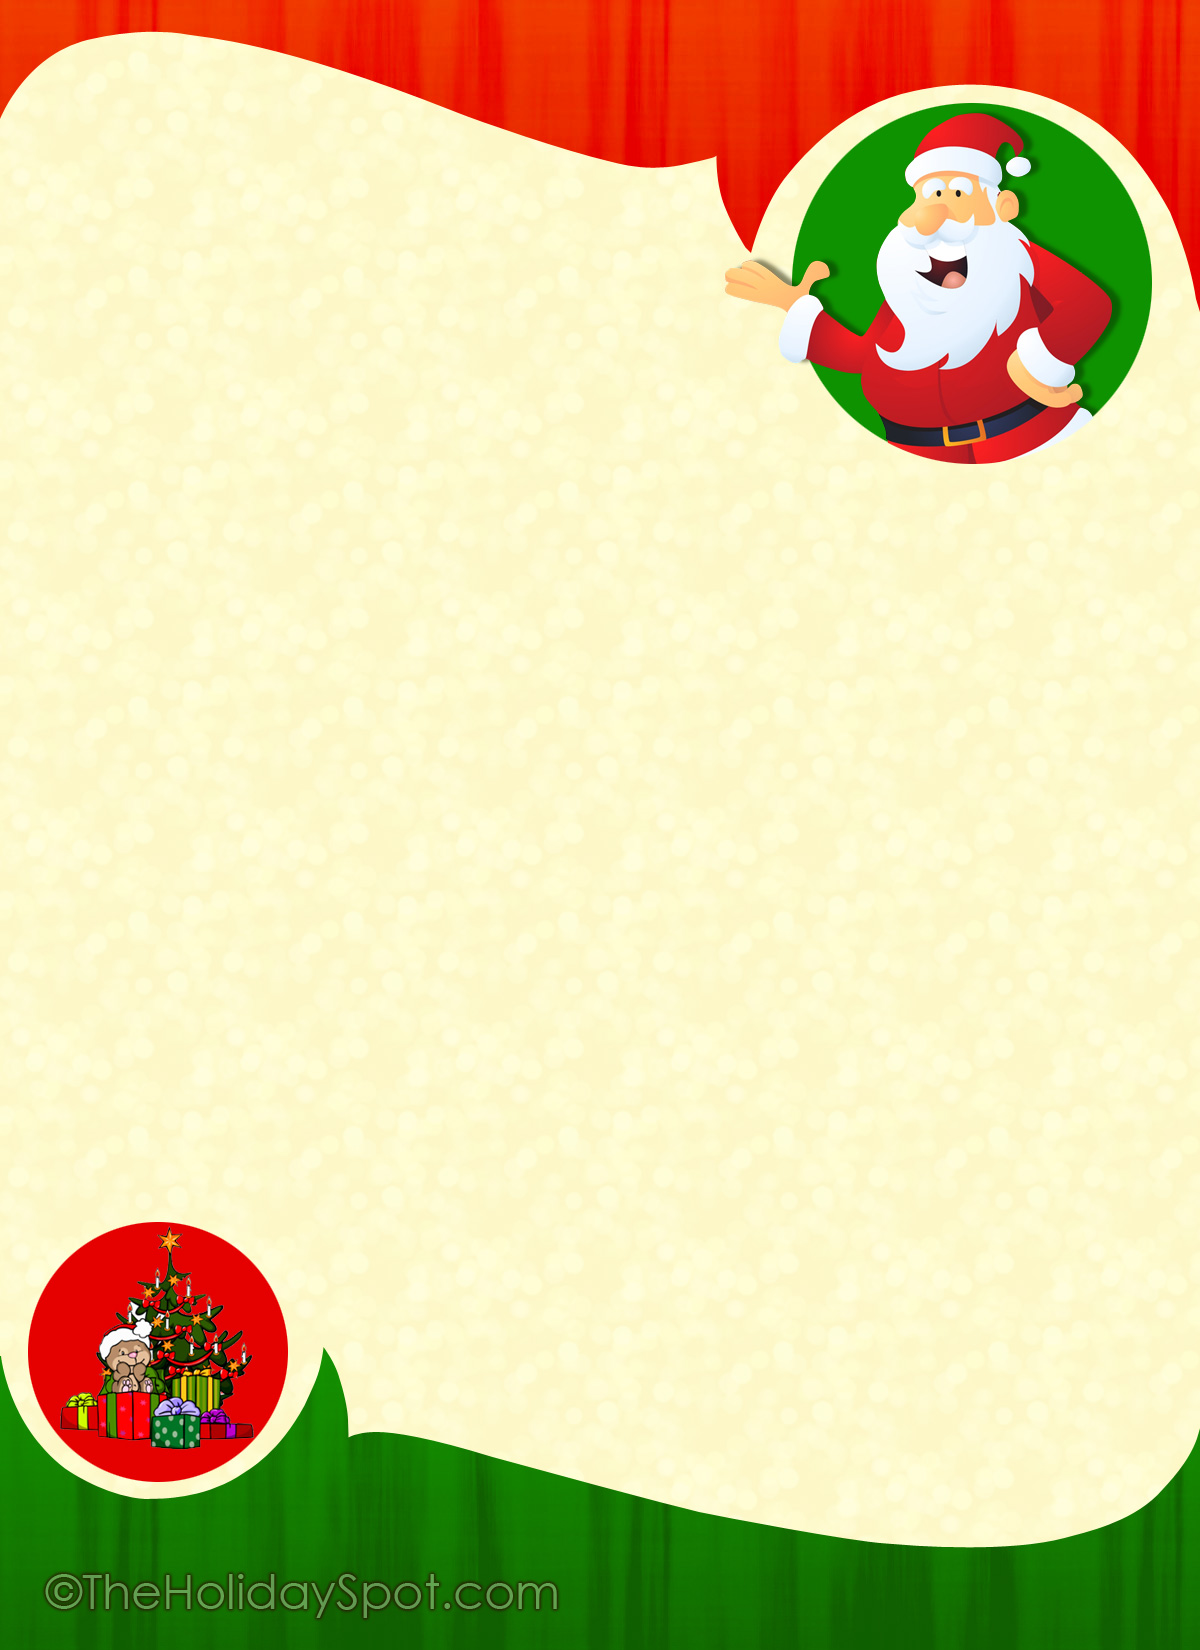 Free Christmas Borders For Letters Images & Pictures - Becuo